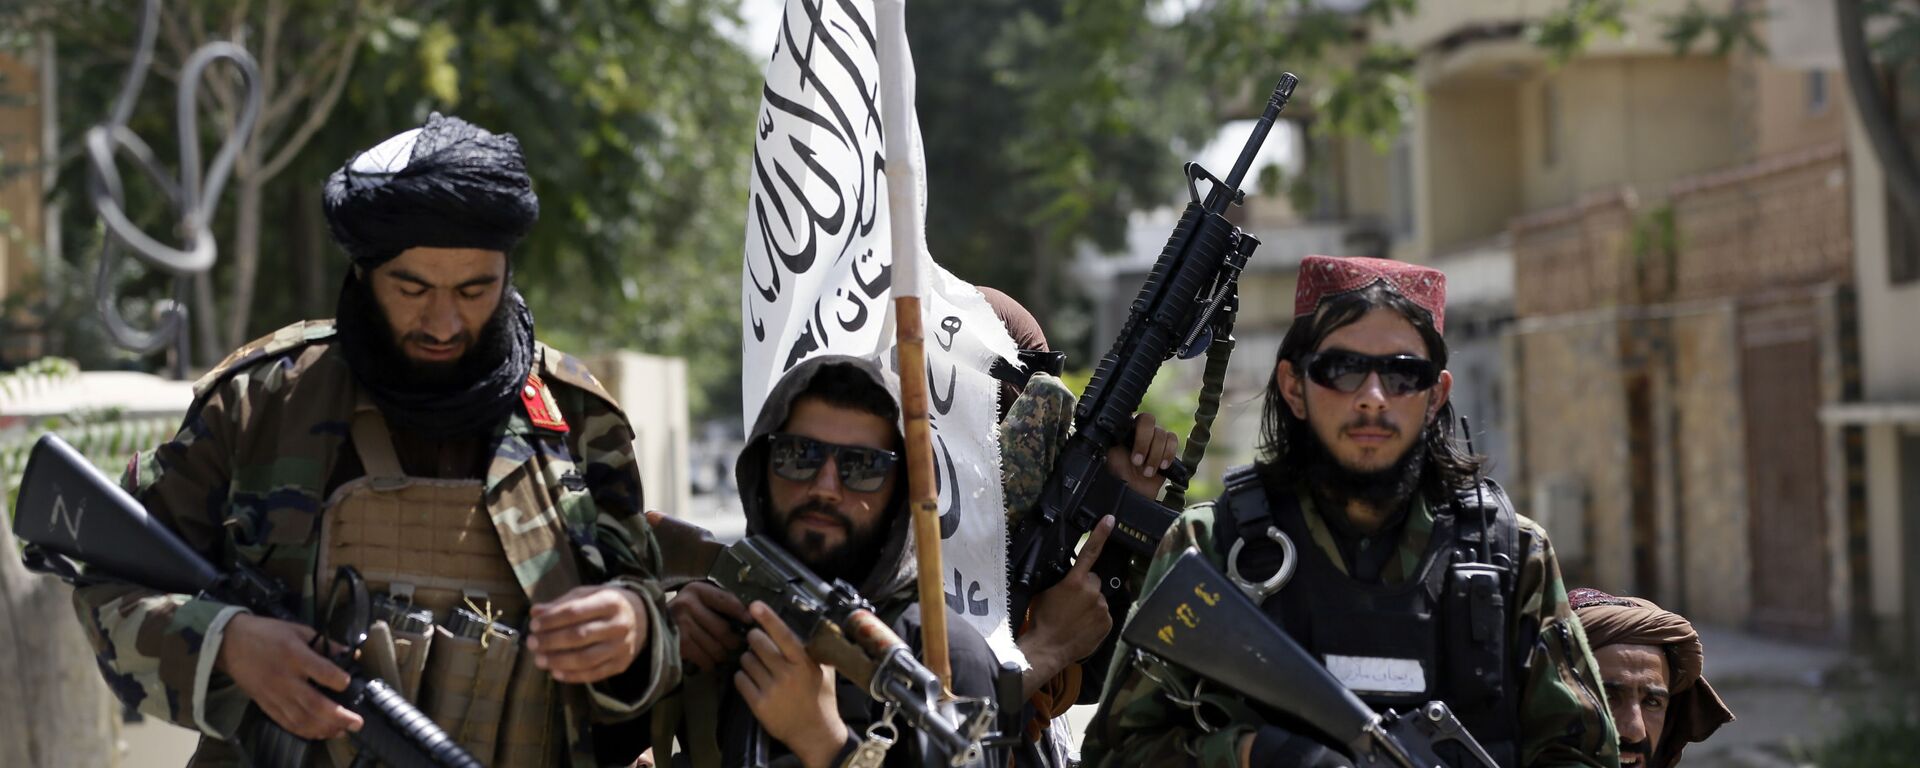 In this 19 August 2021 file photo, Taliban fighters display their flag on patrol in Kabul, Afghanistan. When US President Joe Biden took office earlier this year, Western allies were falling over themselves to welcome and praise him and hail a new era in trans-Atlantic cooperation. - Sputnik International, 1920, 26.08.2021